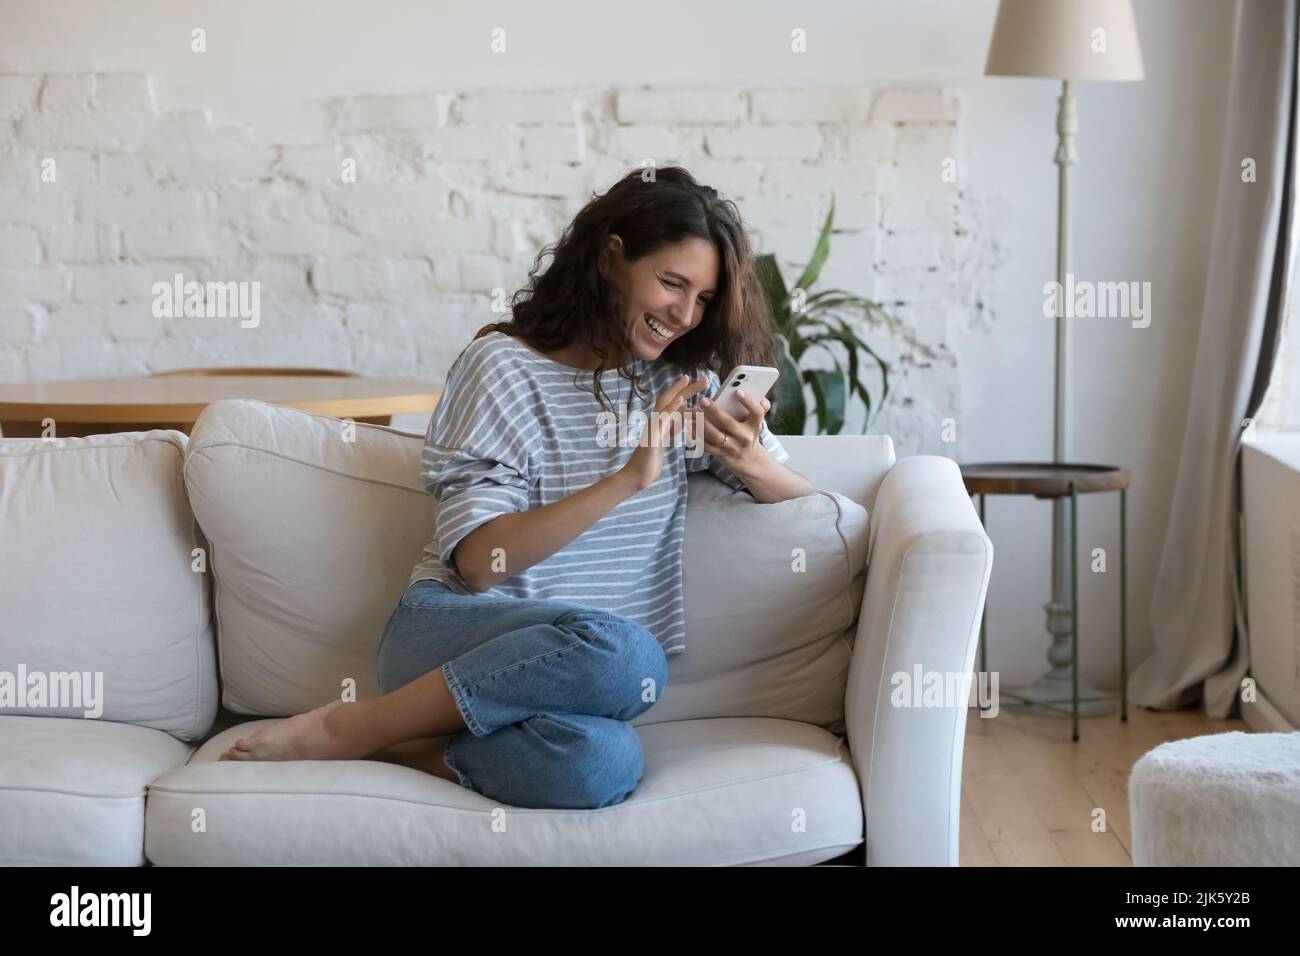 Excited happy young adult woman reading message on mobile phone Stock Photo